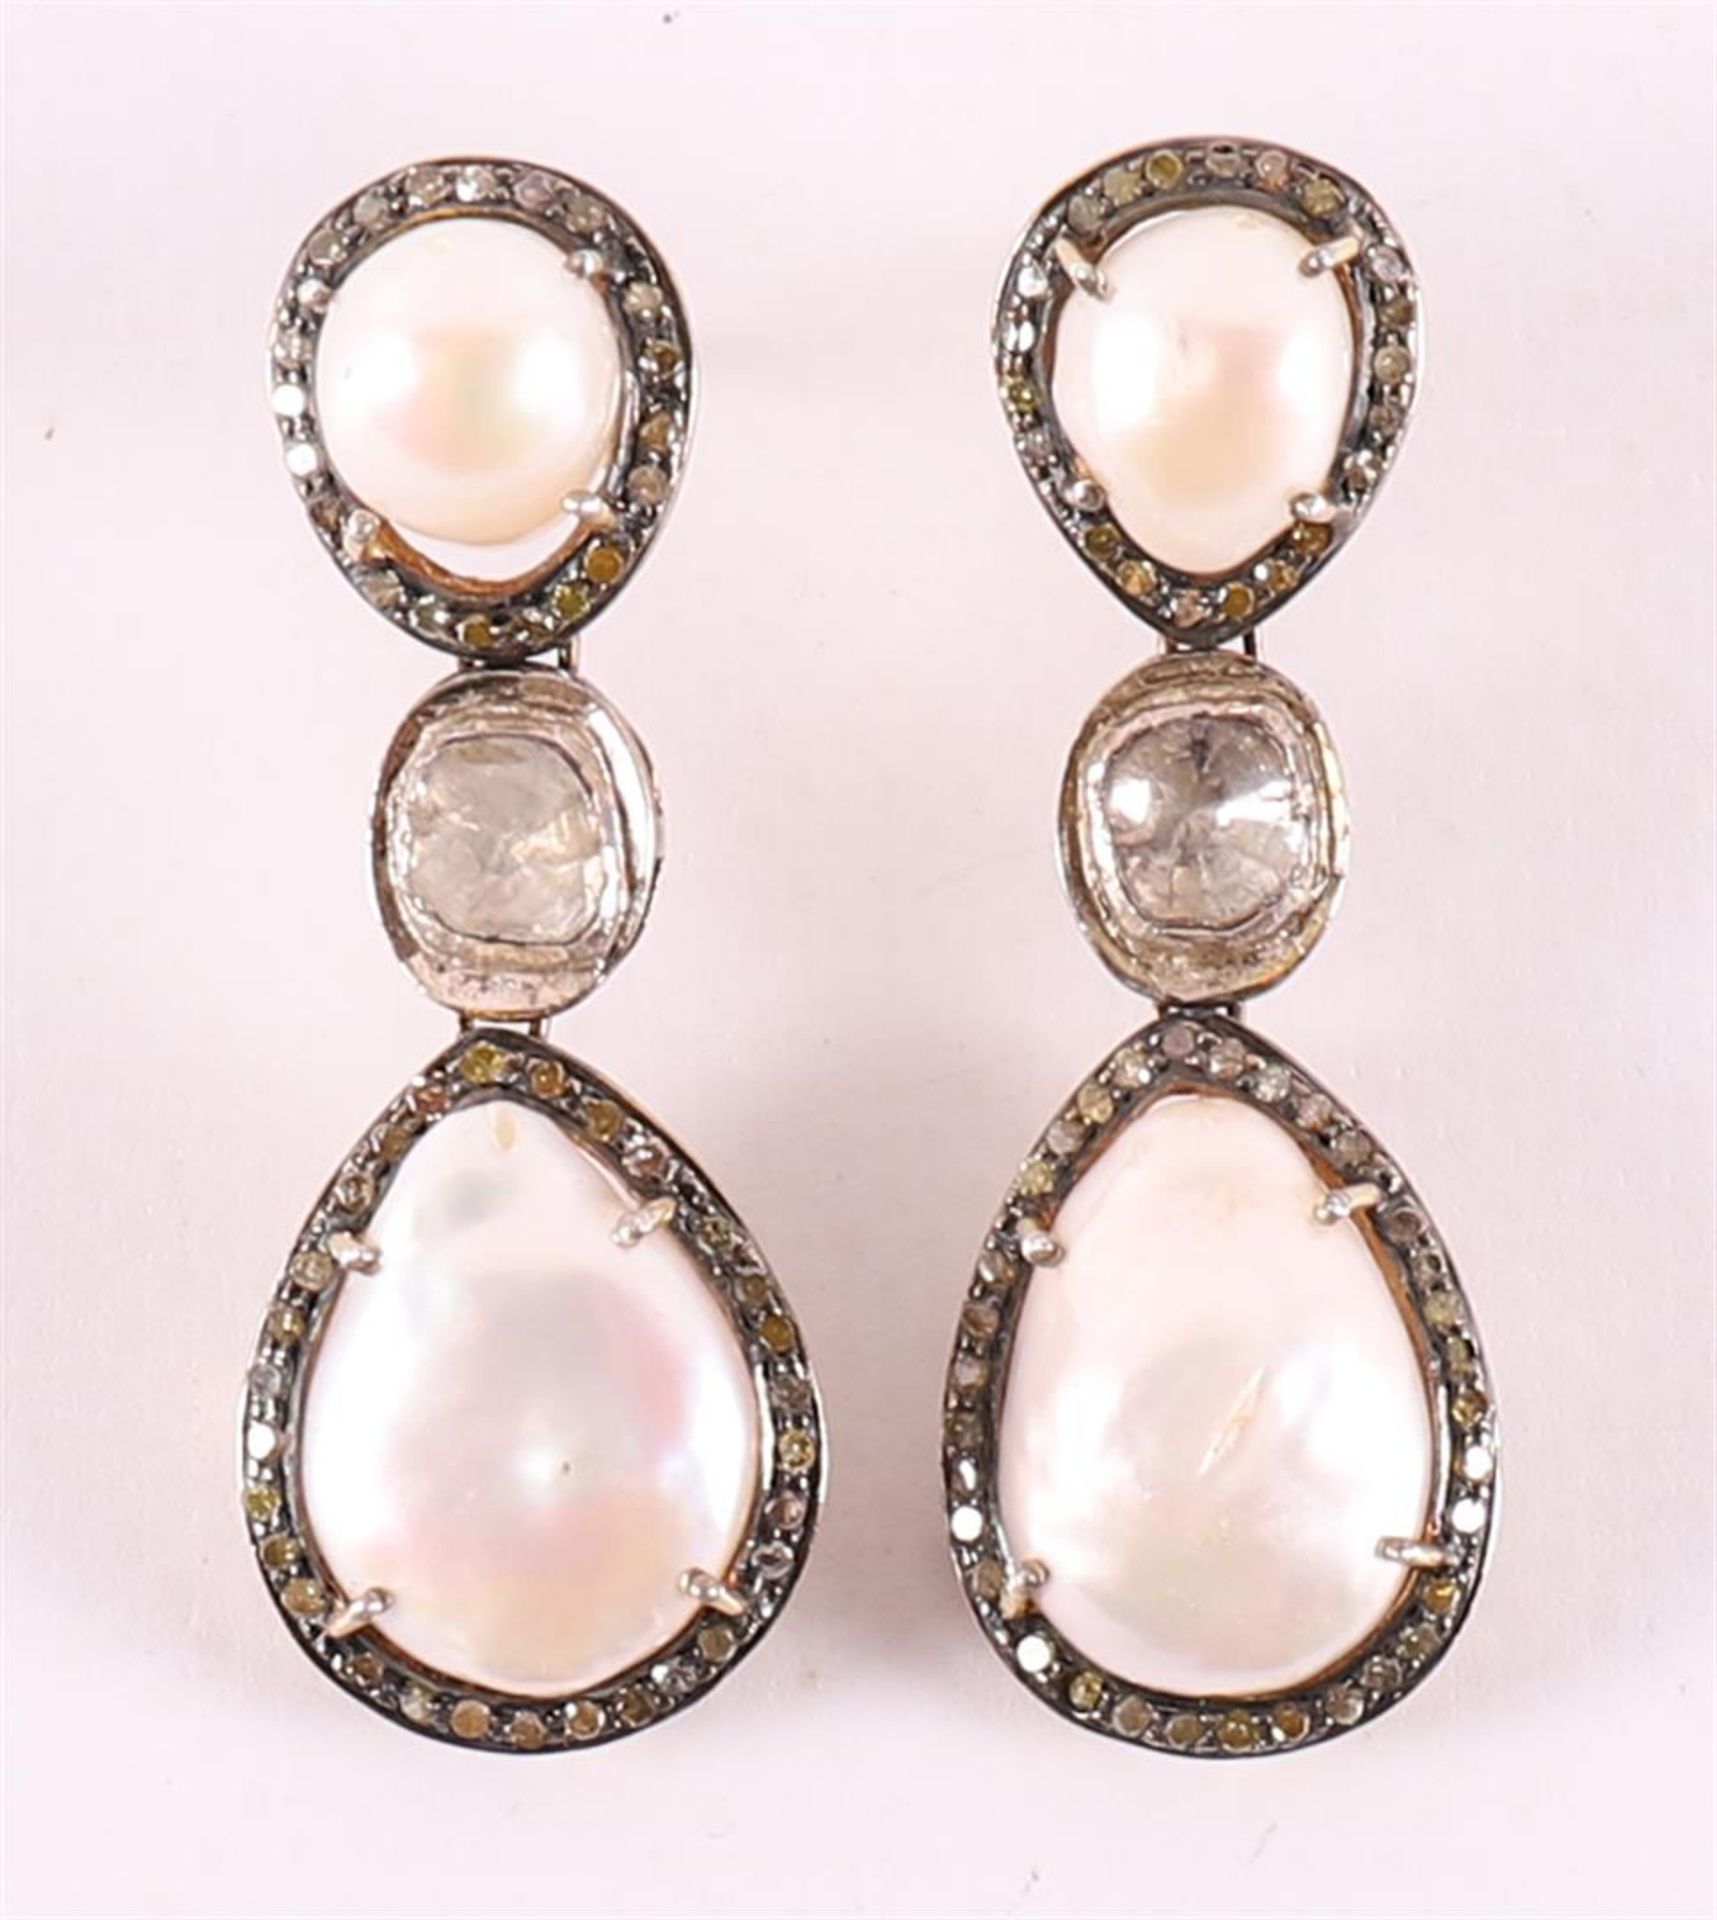 A pair of partly gold-plated silver earrings with 4 pearls, surrounded by diamon